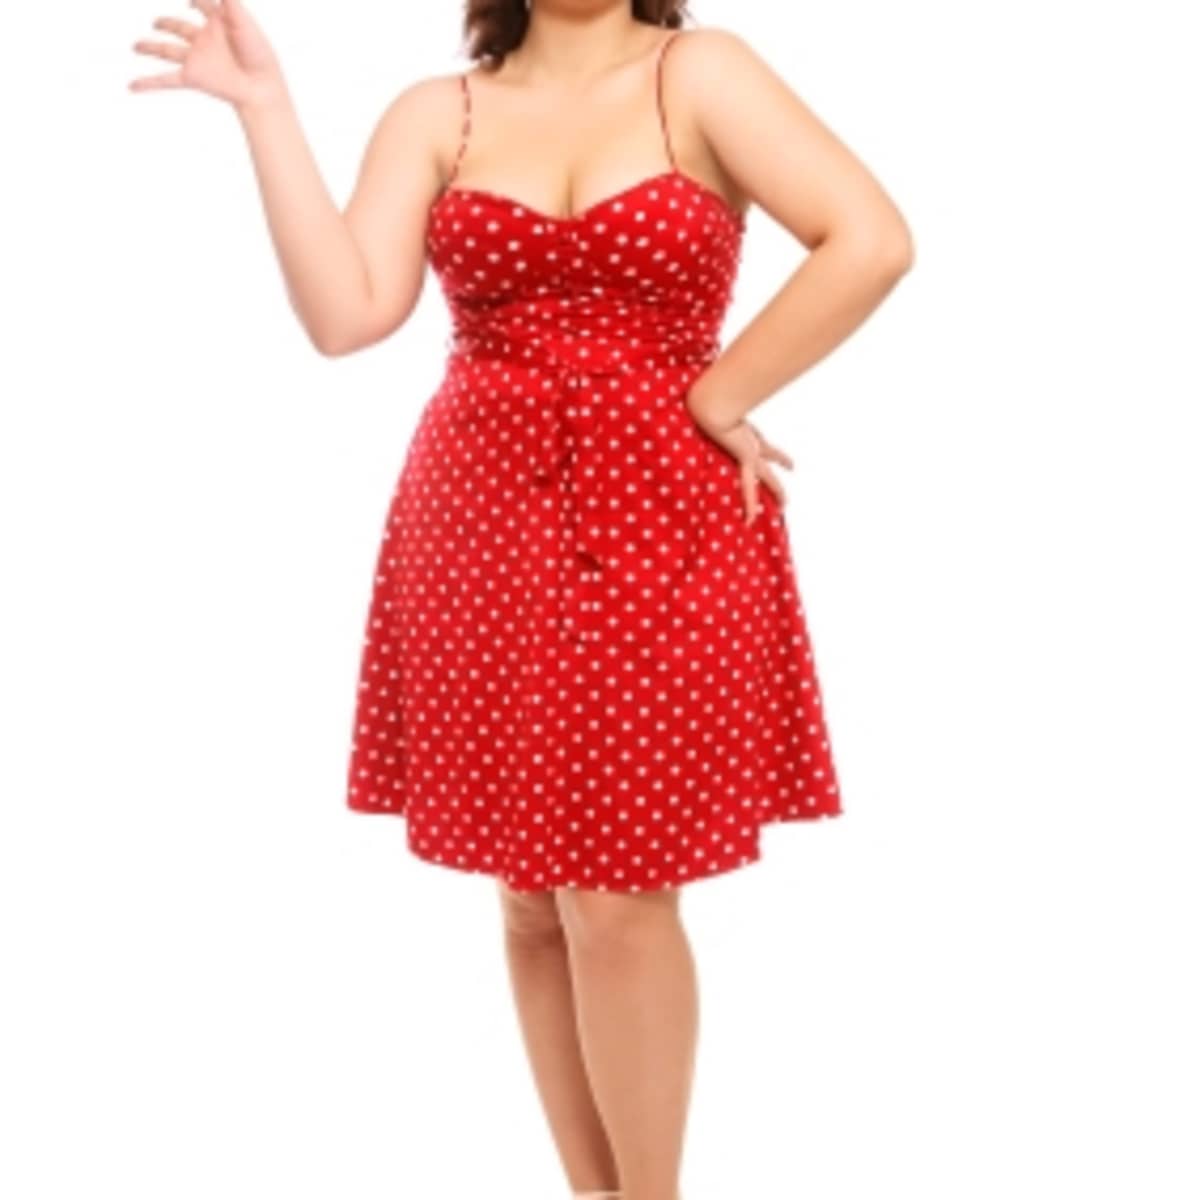 Choosing Fashions That Flatter Your Body Type - HubPages